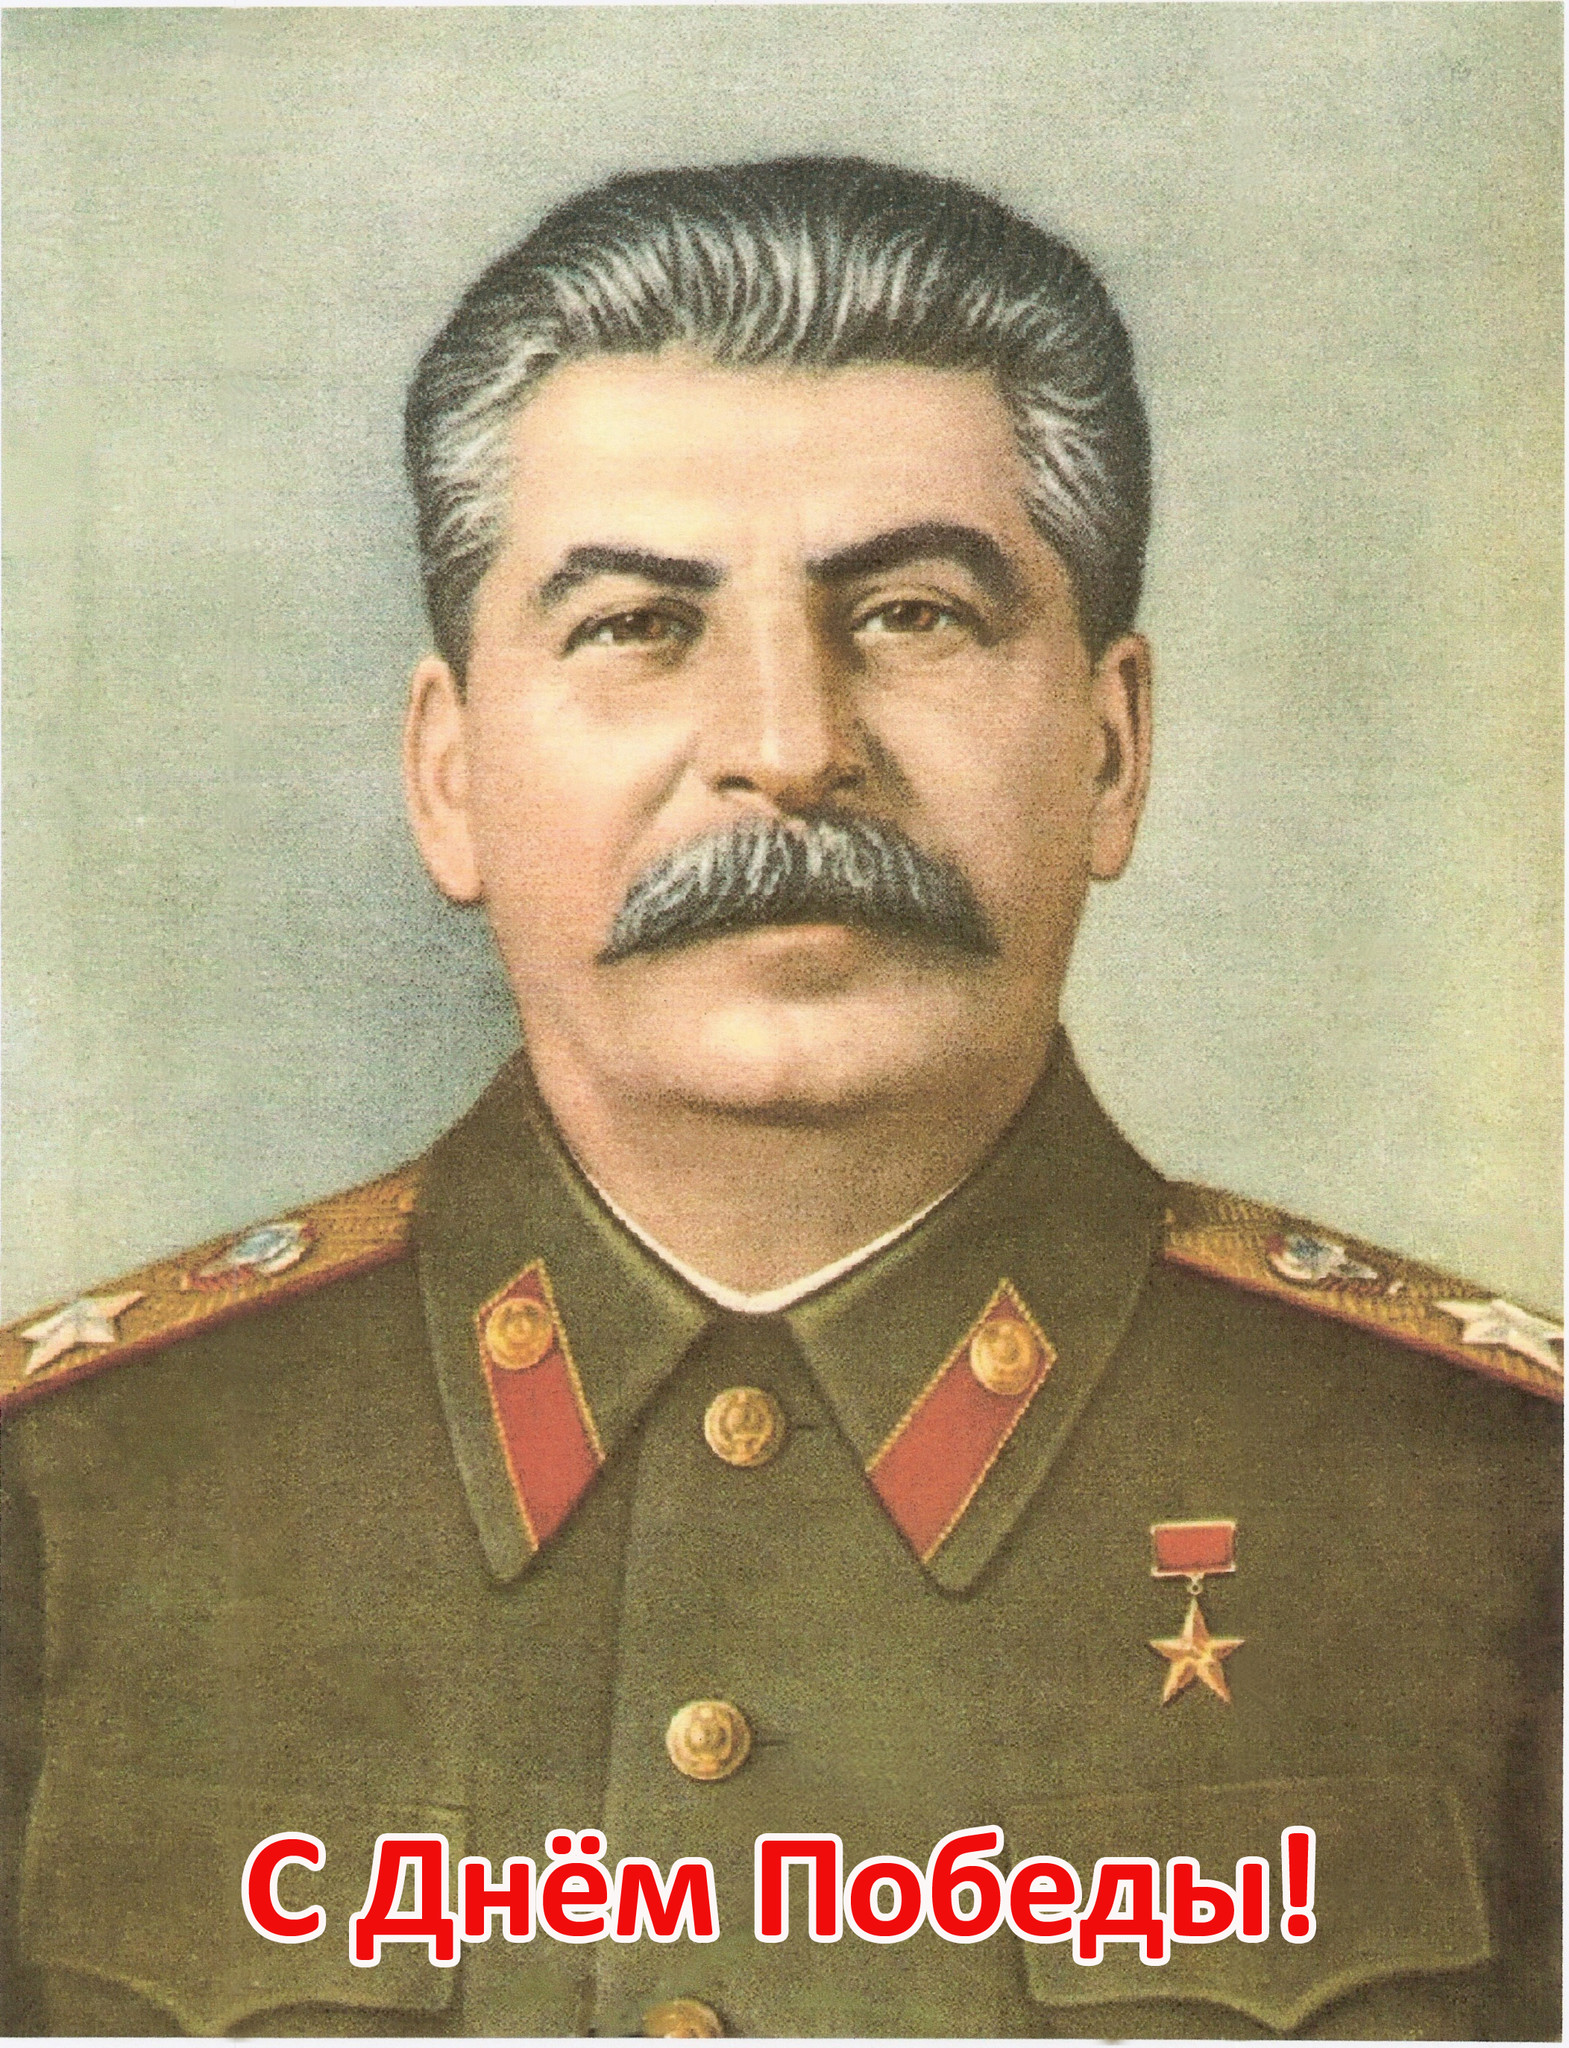 Comrade Stalin Goes To Africa [1991]